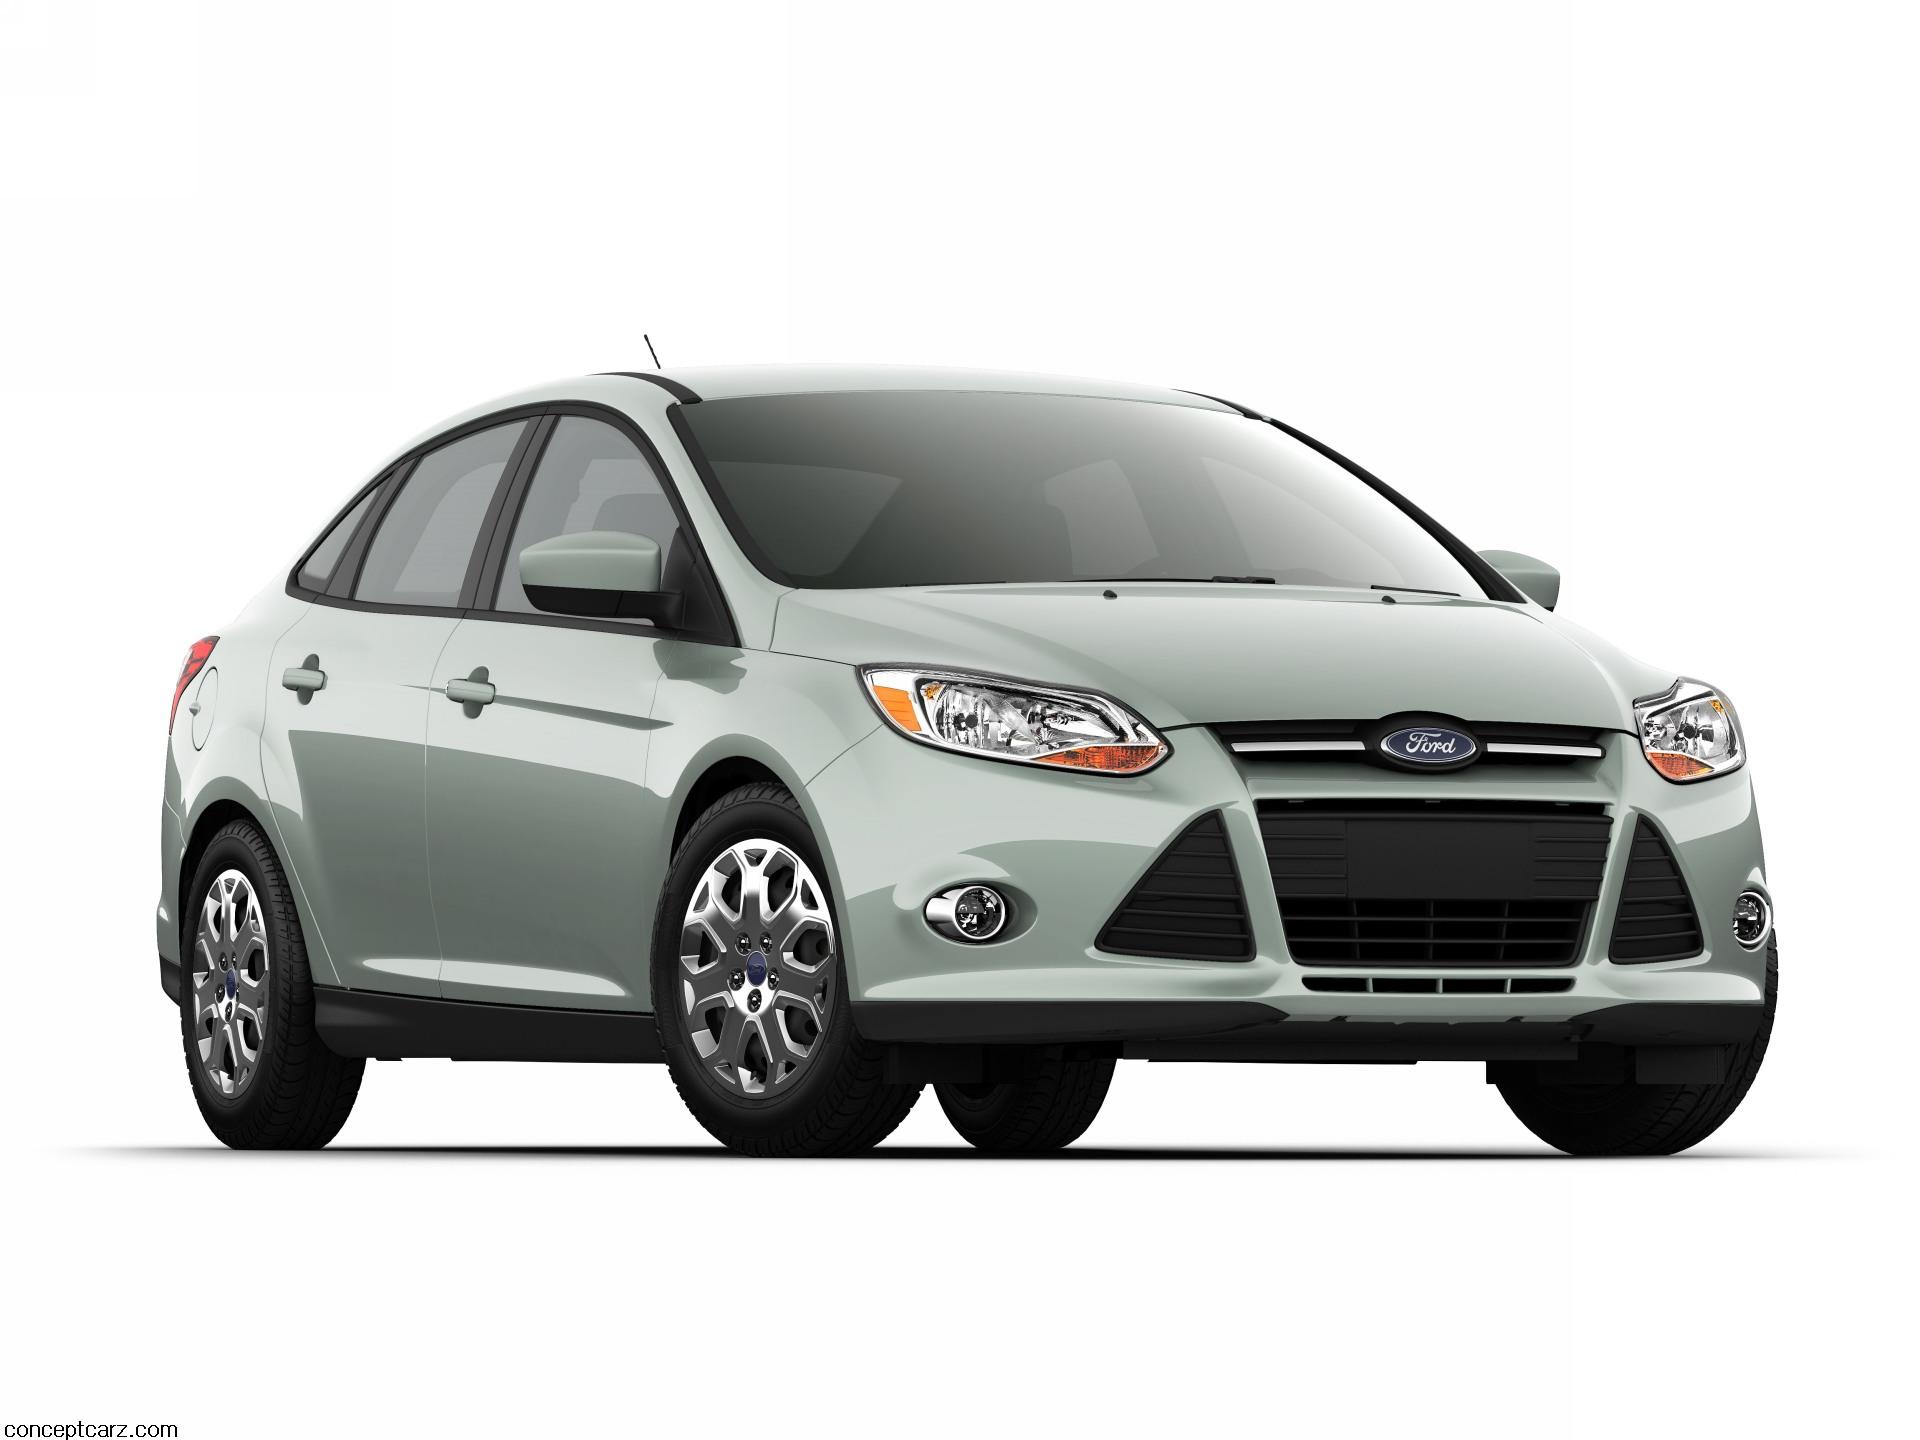 Ford focus transmission recall 2012 #1